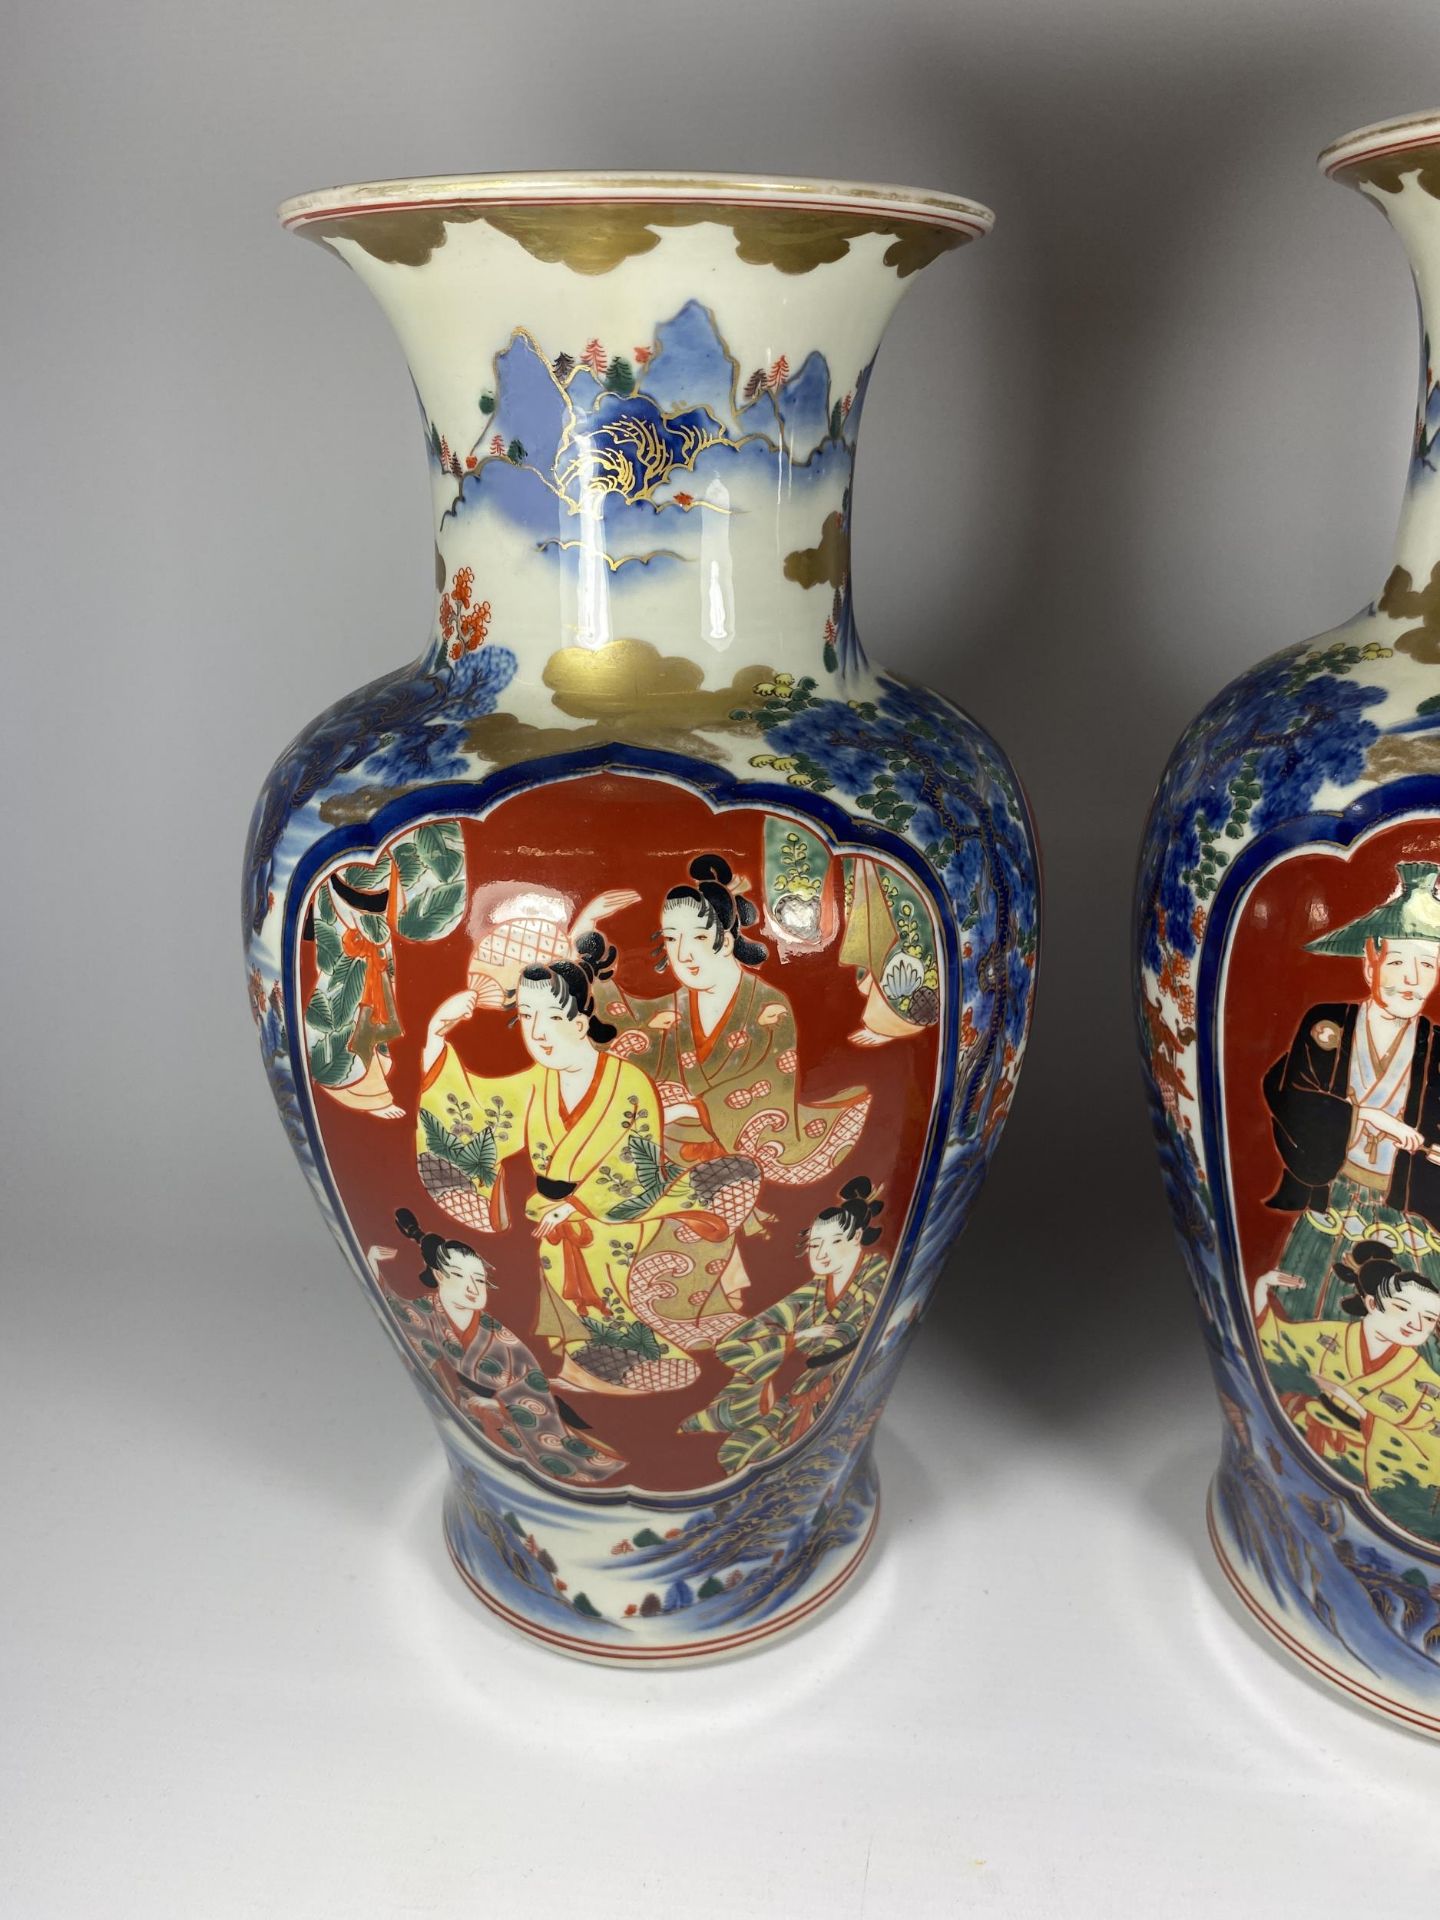 A LARGE PAIR OF JAPANESE MEIJI PERIOD (1868-1912) VASES WITH FIGURAL PANELS ON A MOUNTAIN - Image 2 of 6